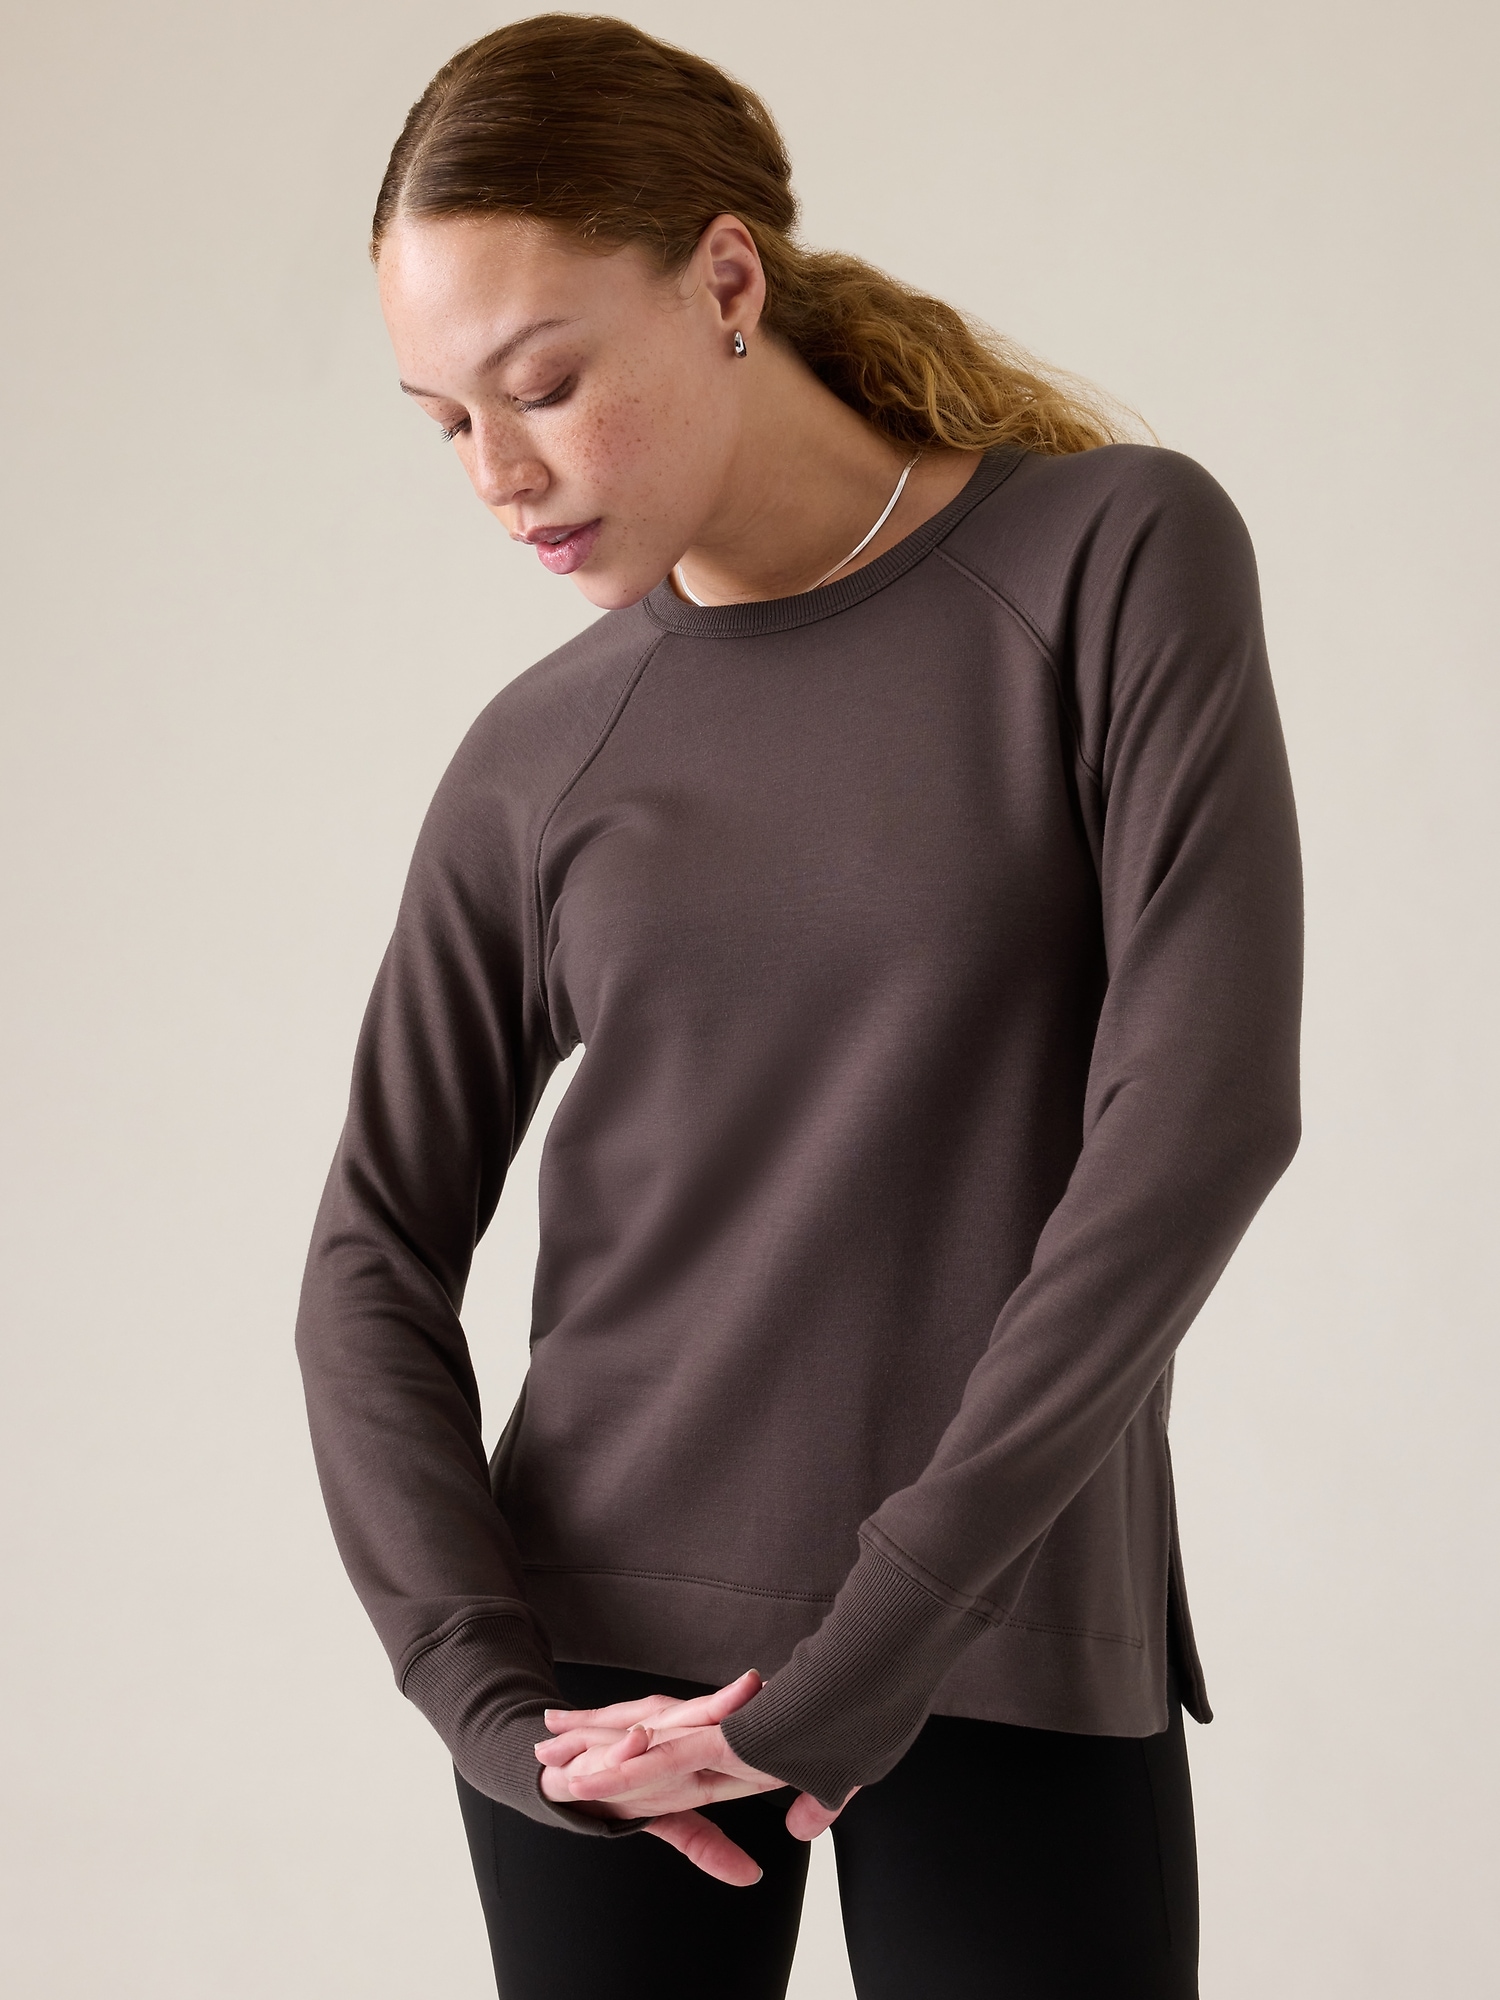 Athleta Coaster Luxe Recover Sweatshirt In Shale